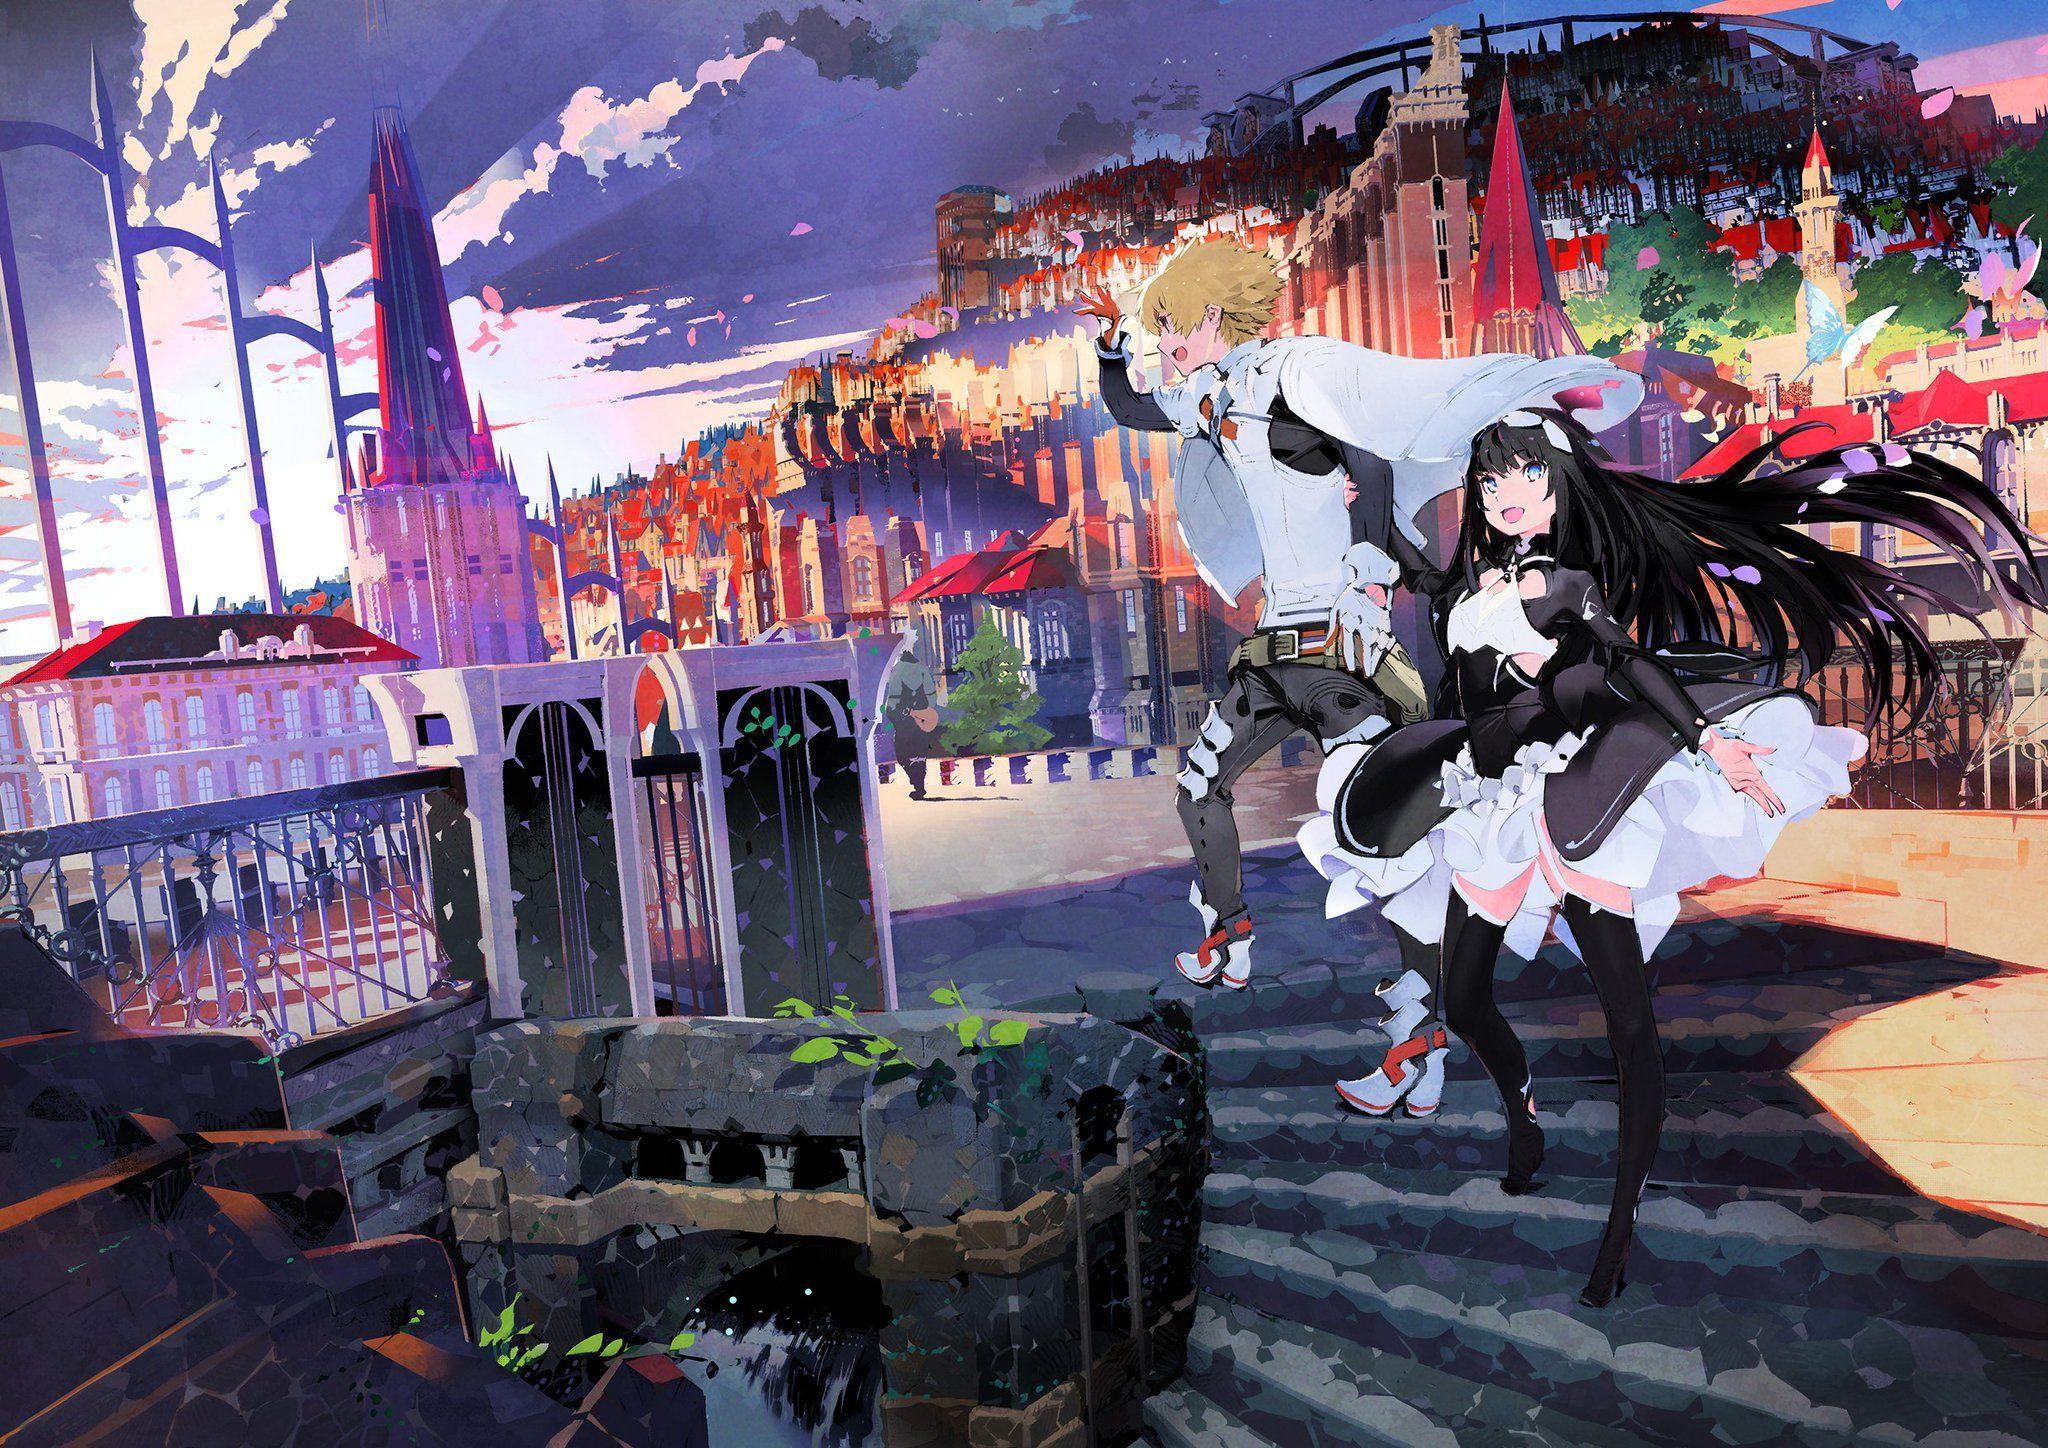 Category:Characters, Infinite Dendrogram Wiki